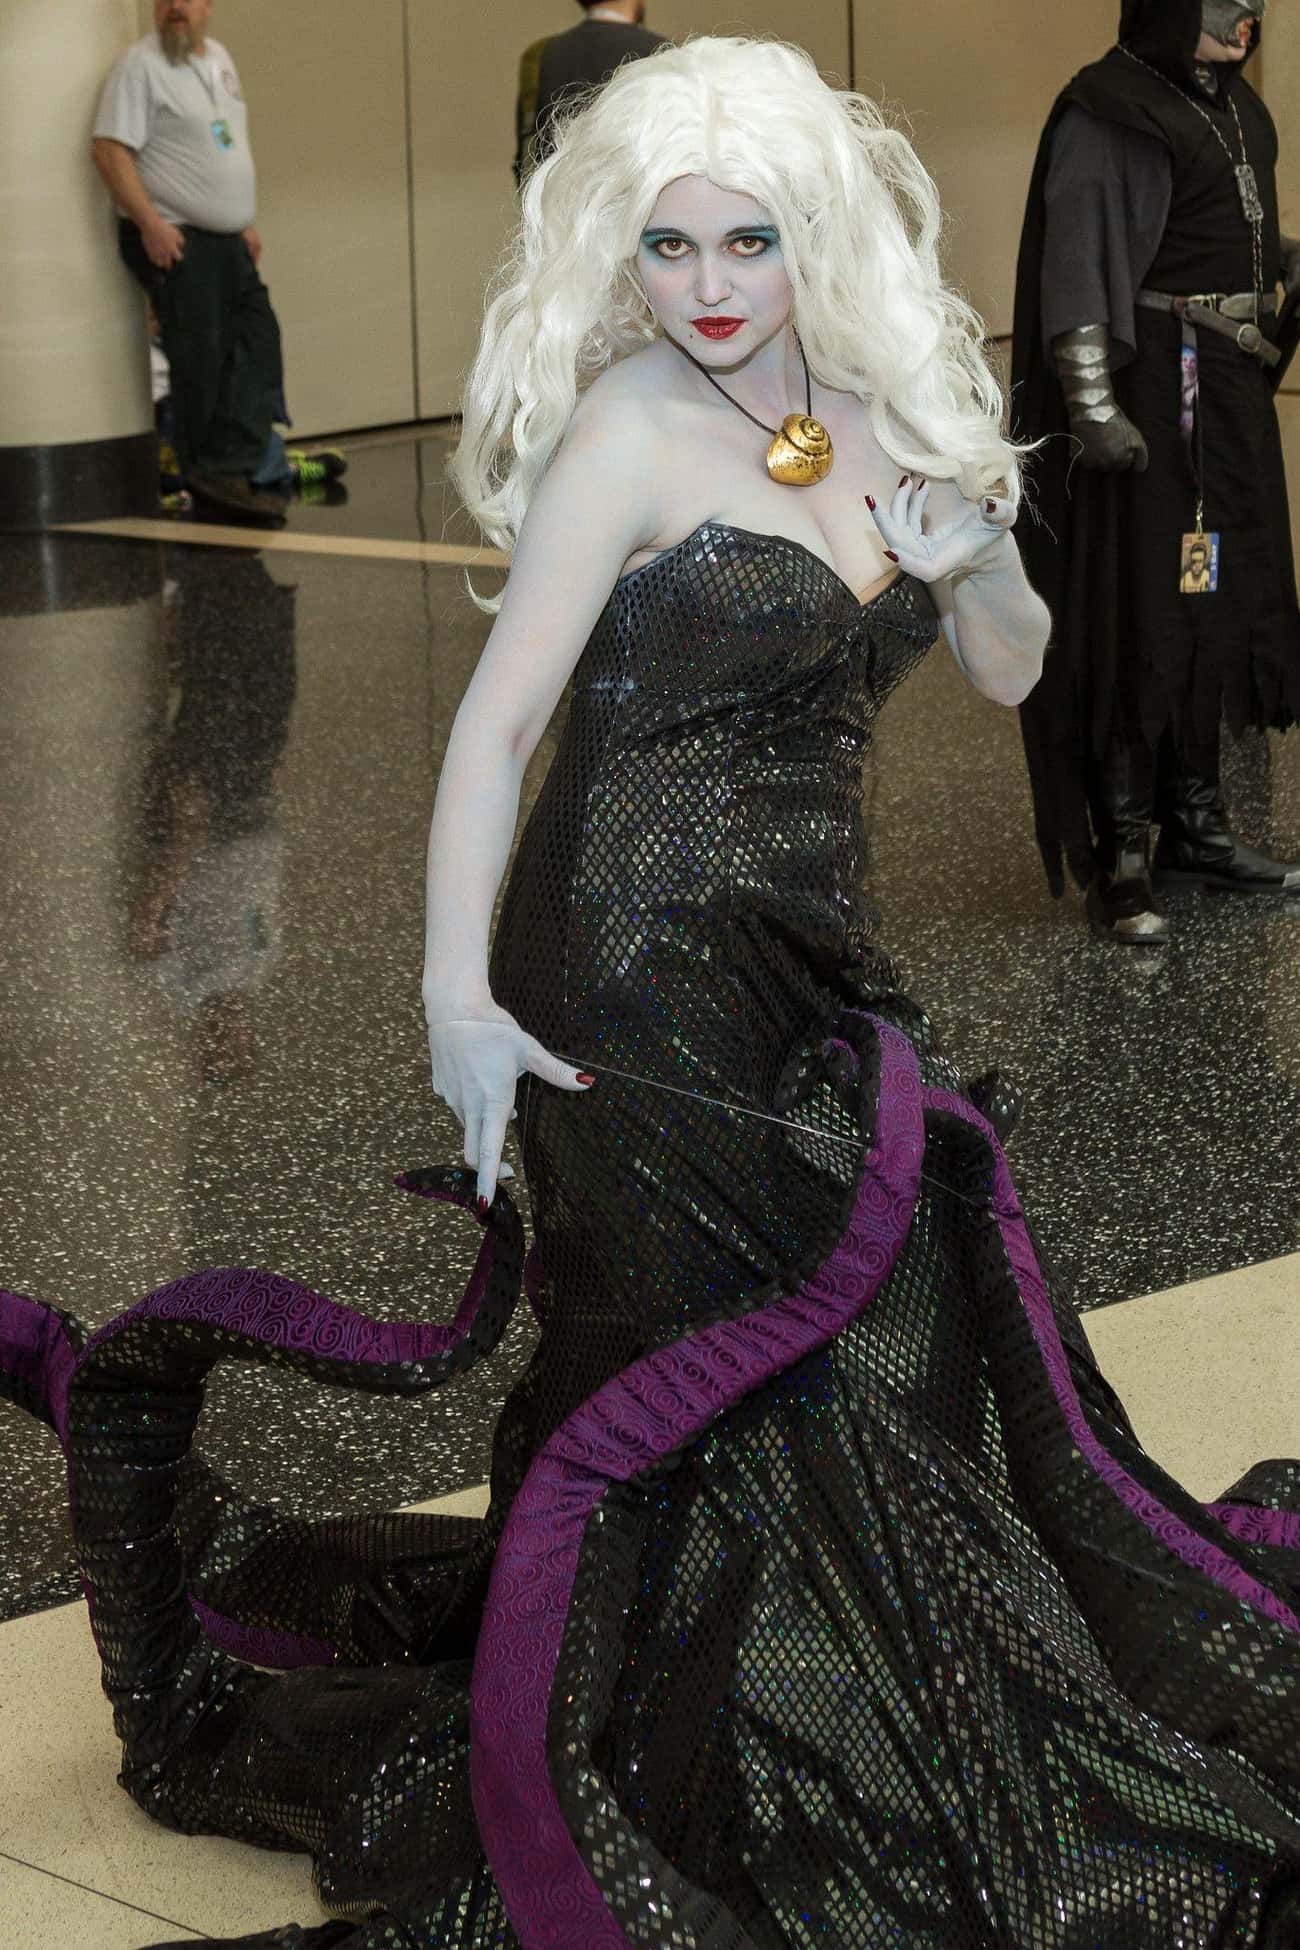 Ursula From 'The Little Mermaid'